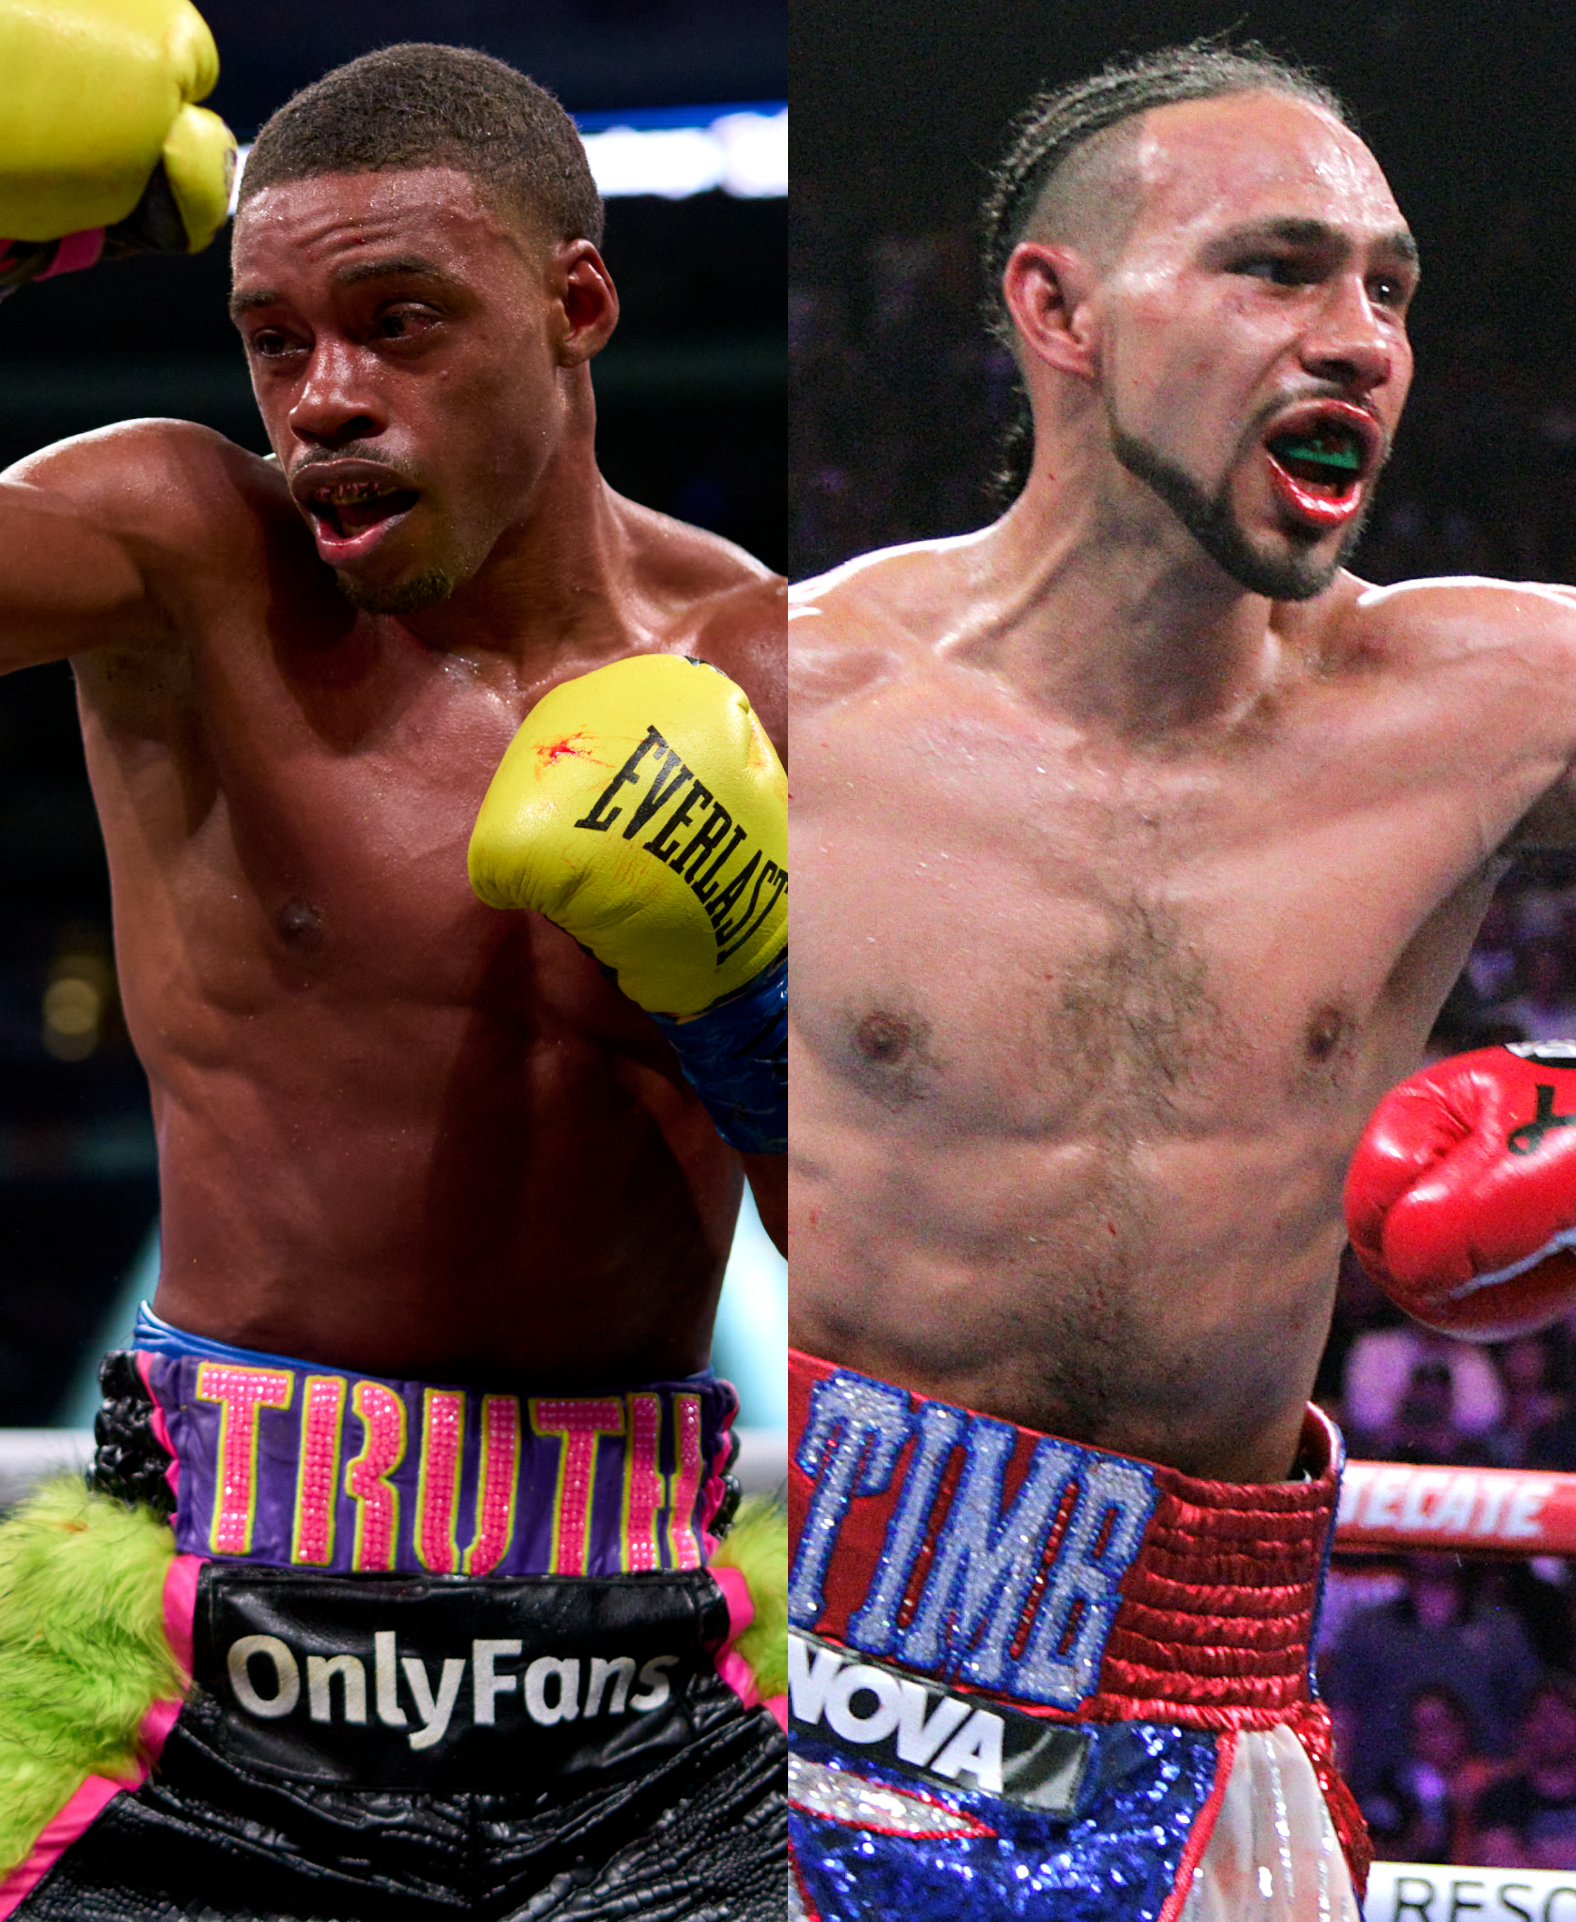 Errol Spence Jr vs Keith Thurman has been ordered by the WBC